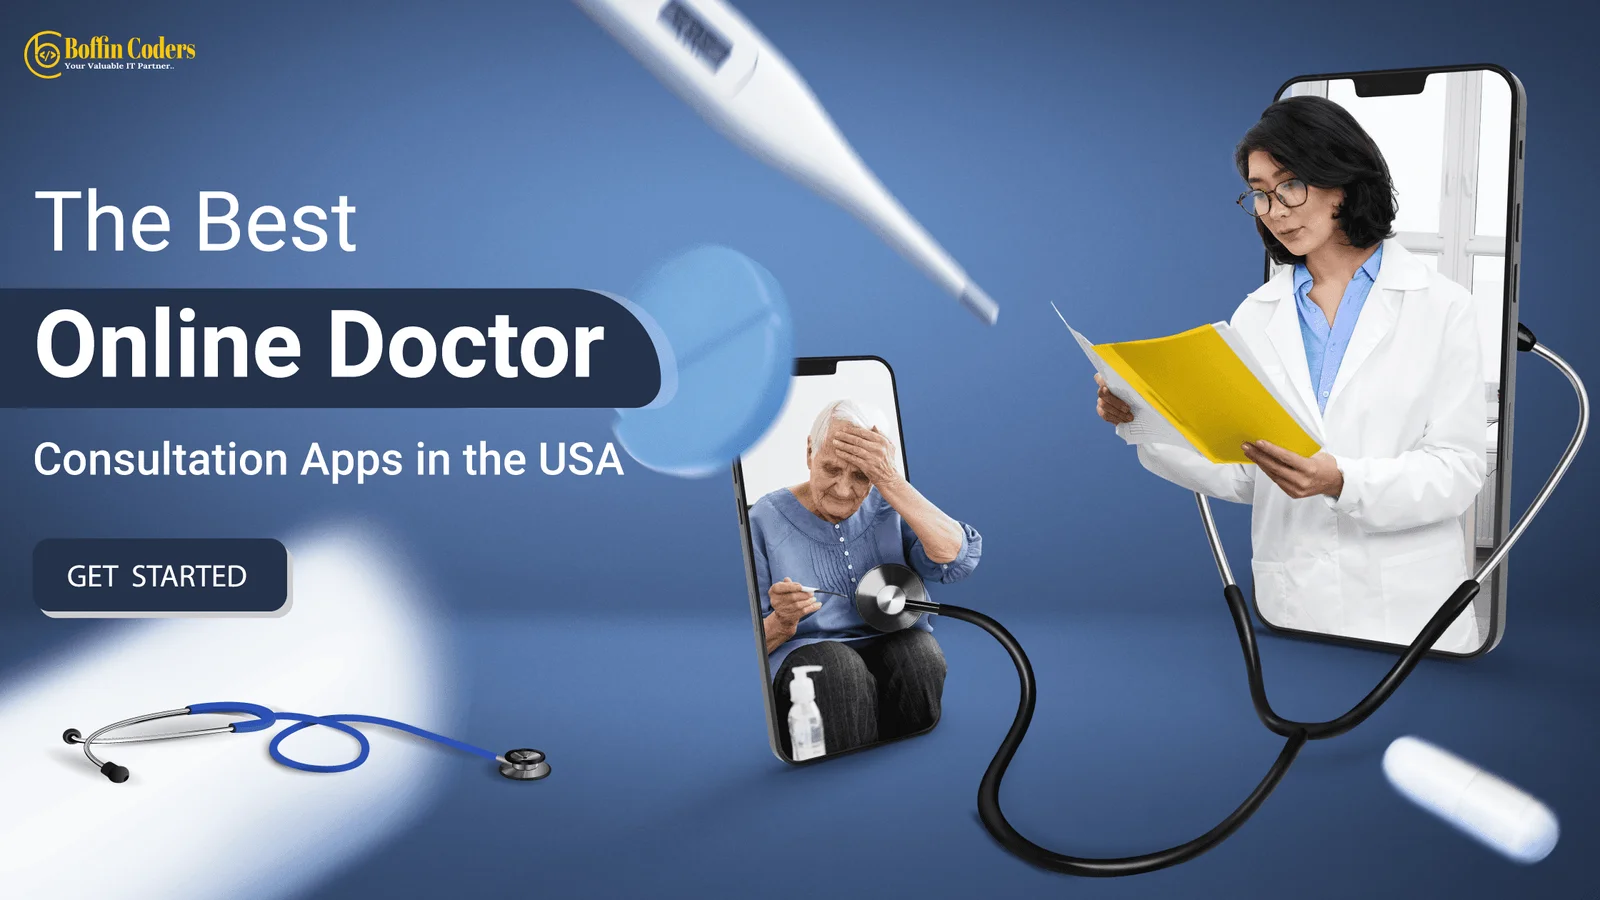 The-Best-Online-Doctor-Consultation-Apps-in-the-USA